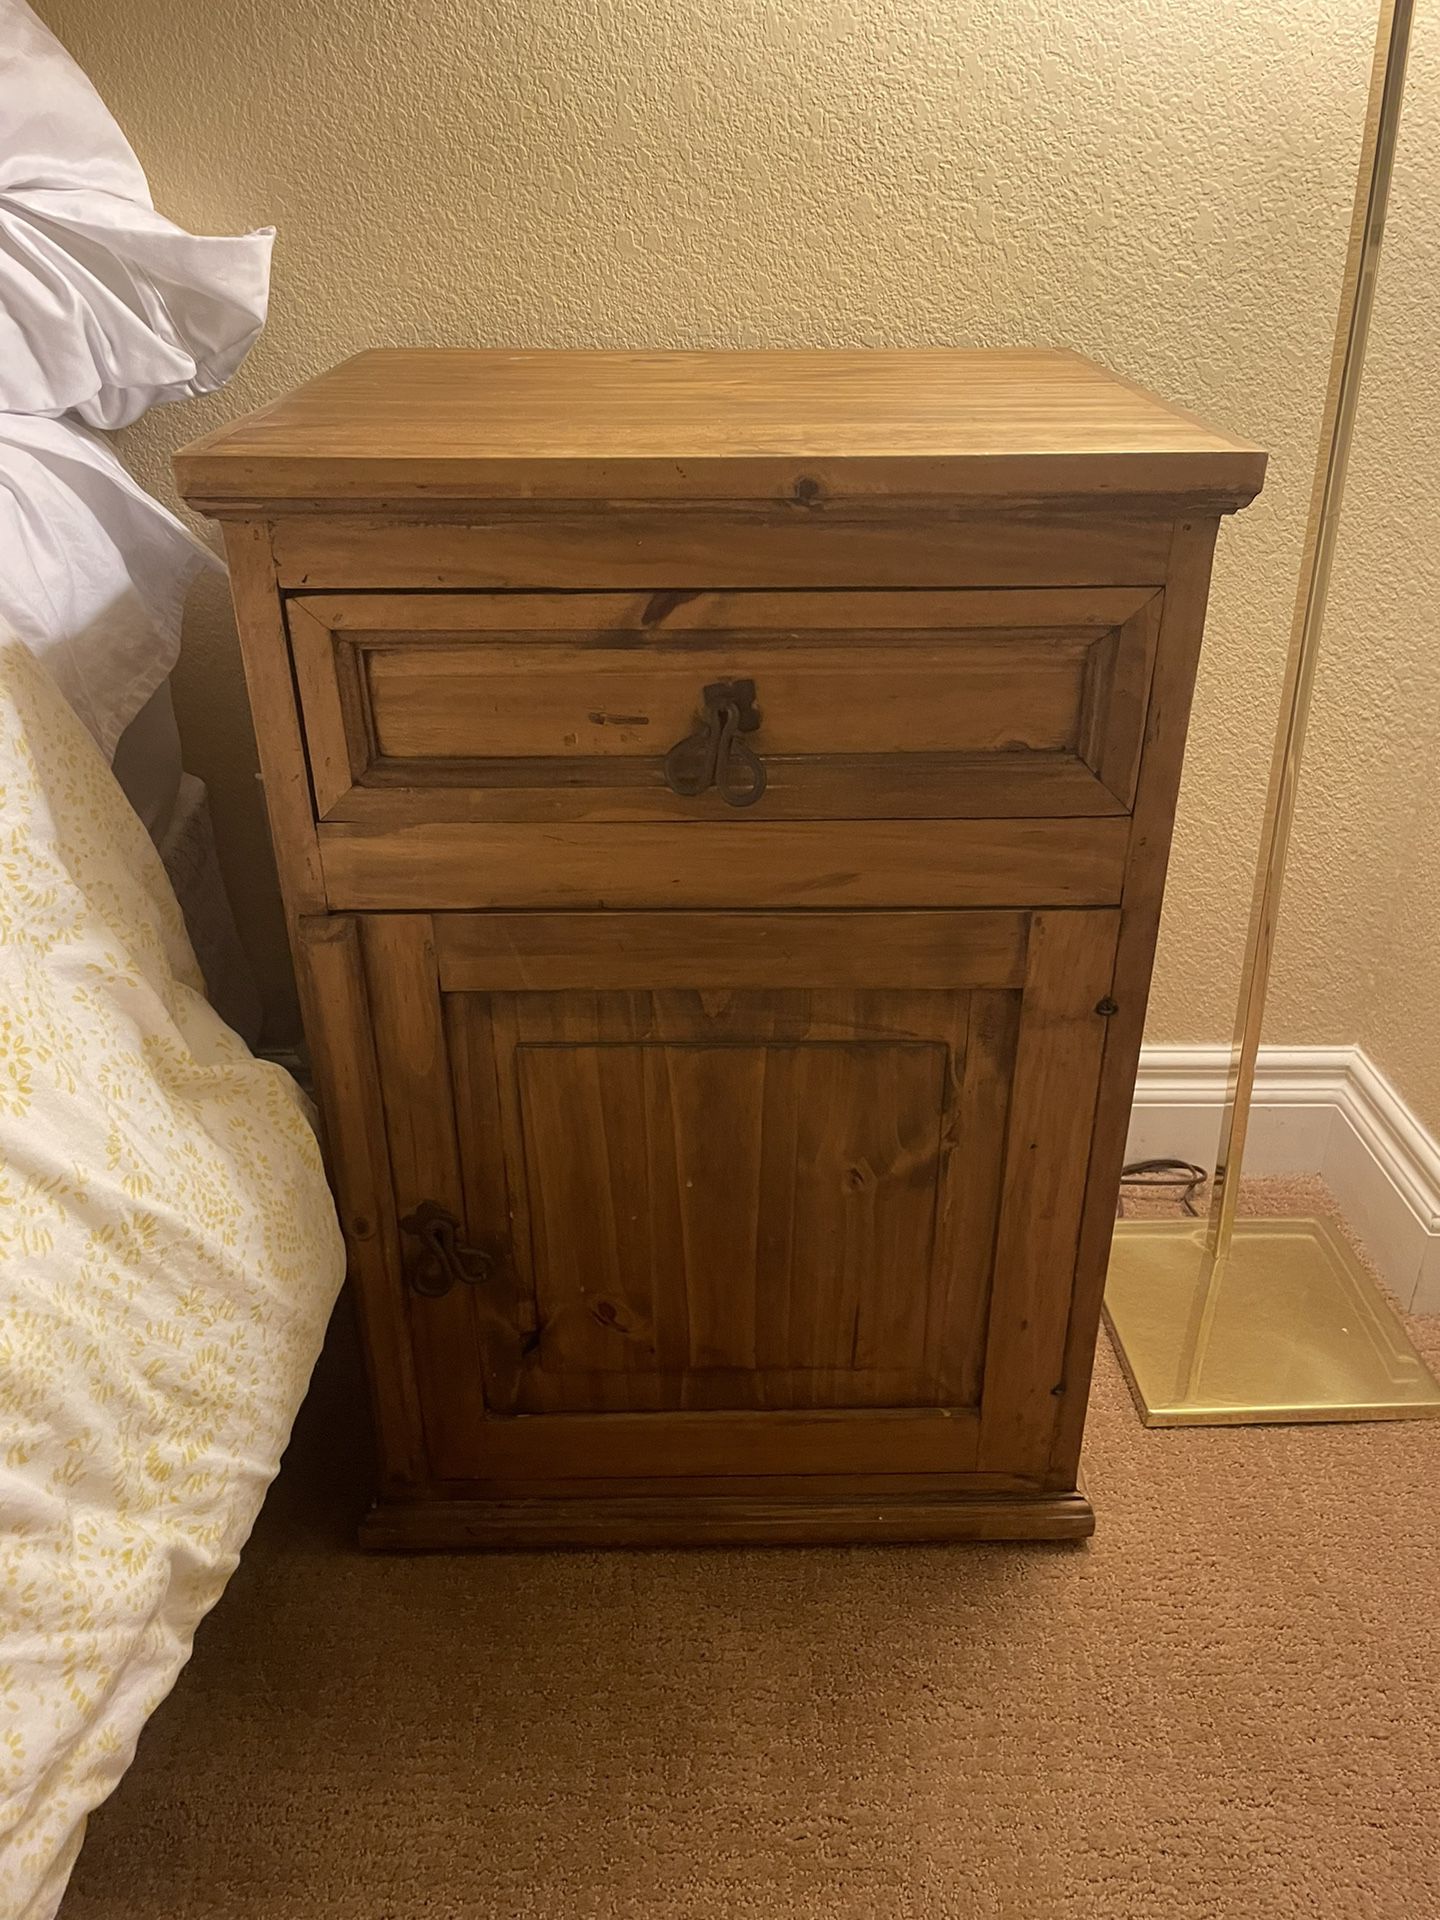 Dresser and end table set